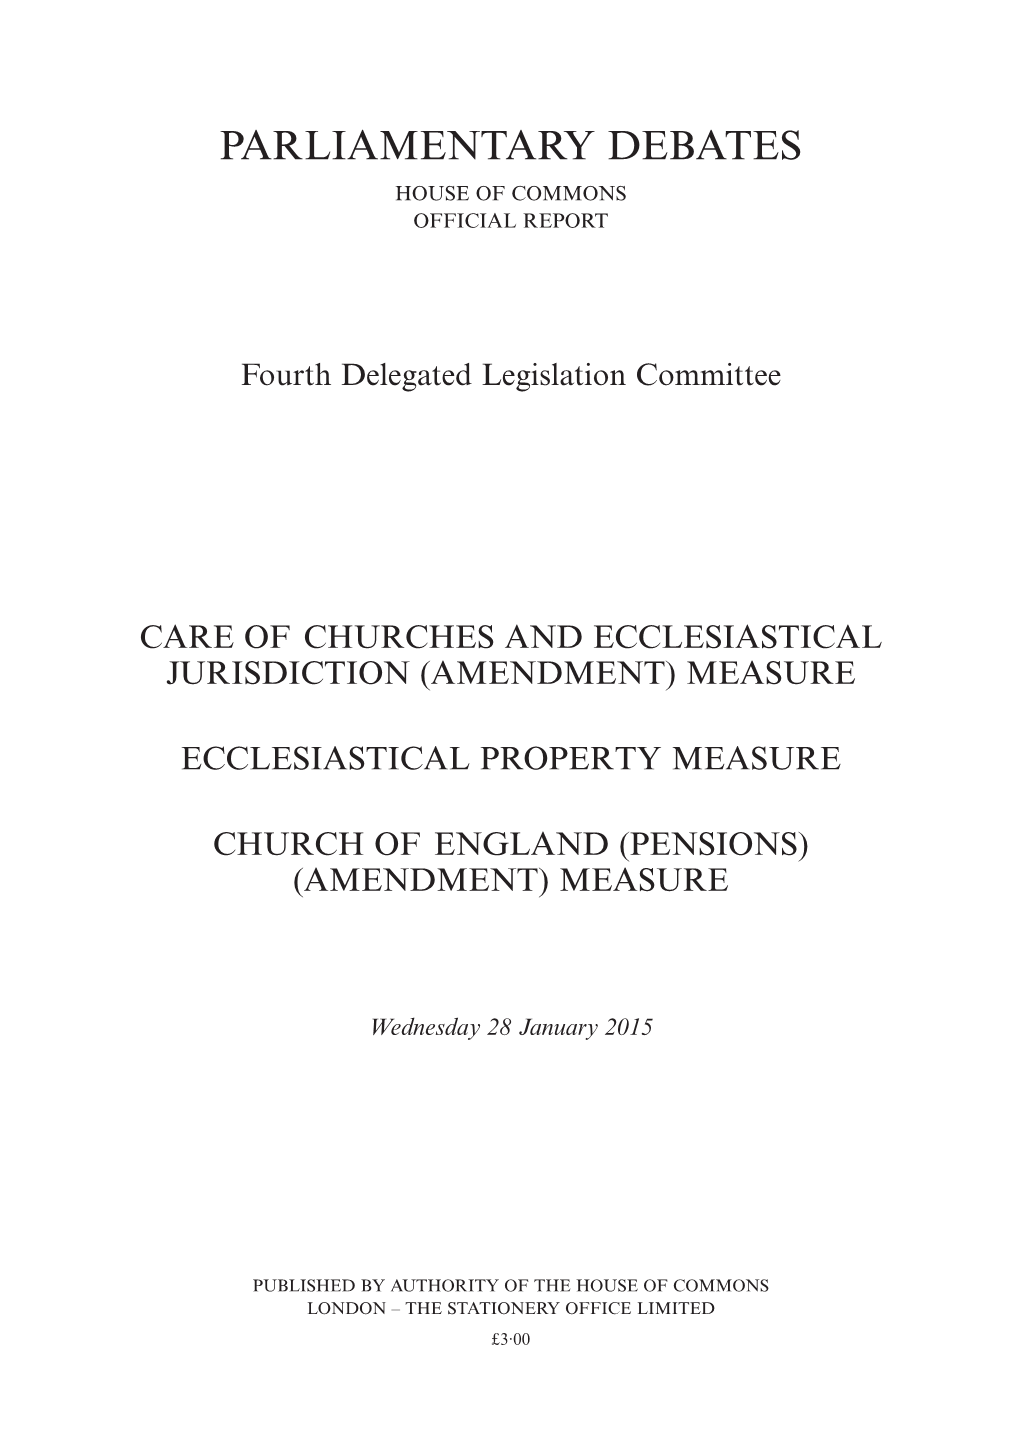 Parliamentary Debates House of Commons Official Report